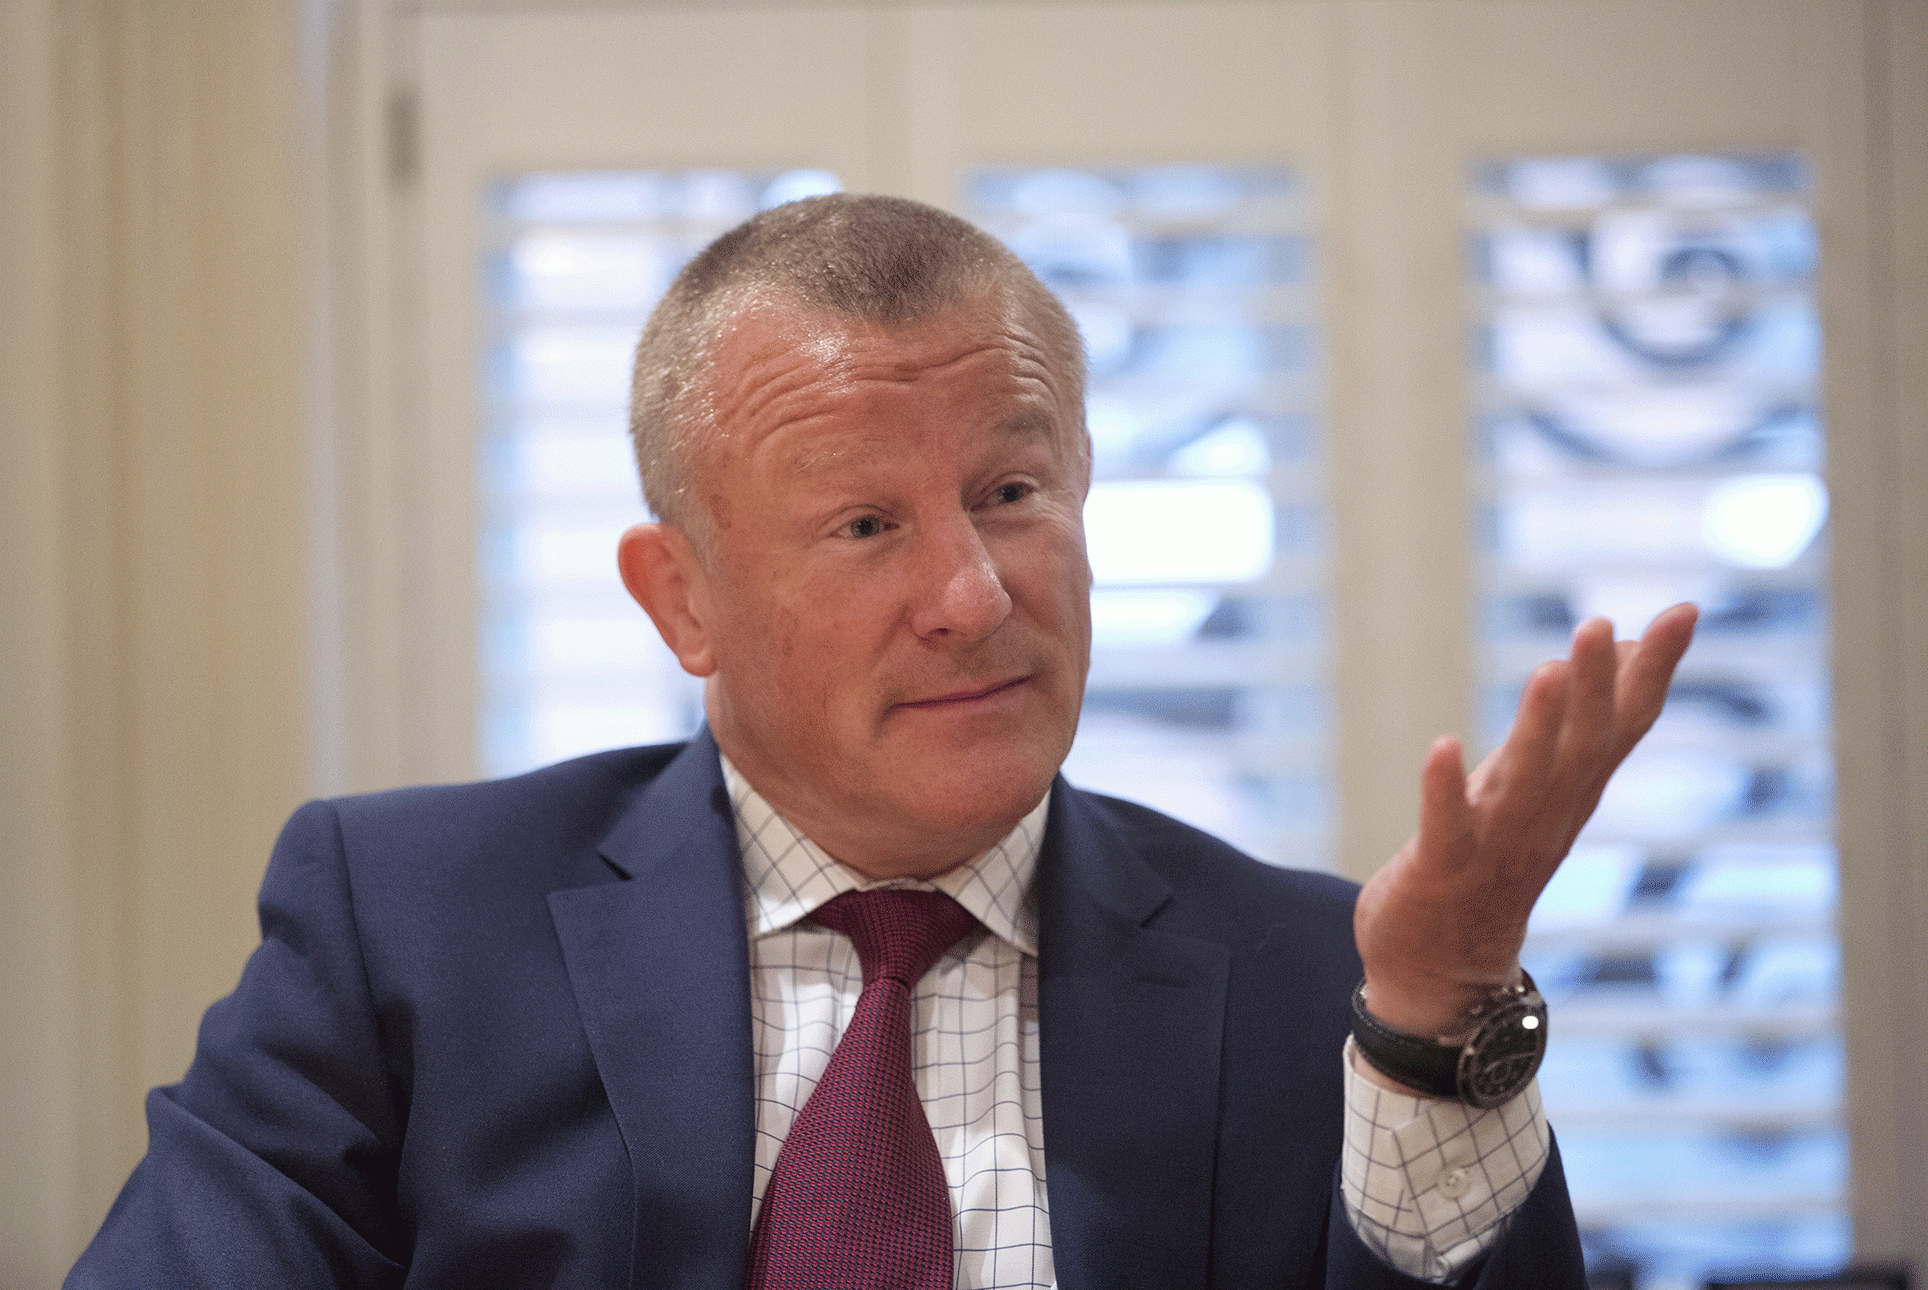 Star fund manager Neil Woodford axes bonuses to prevent 'wrong behaviour'